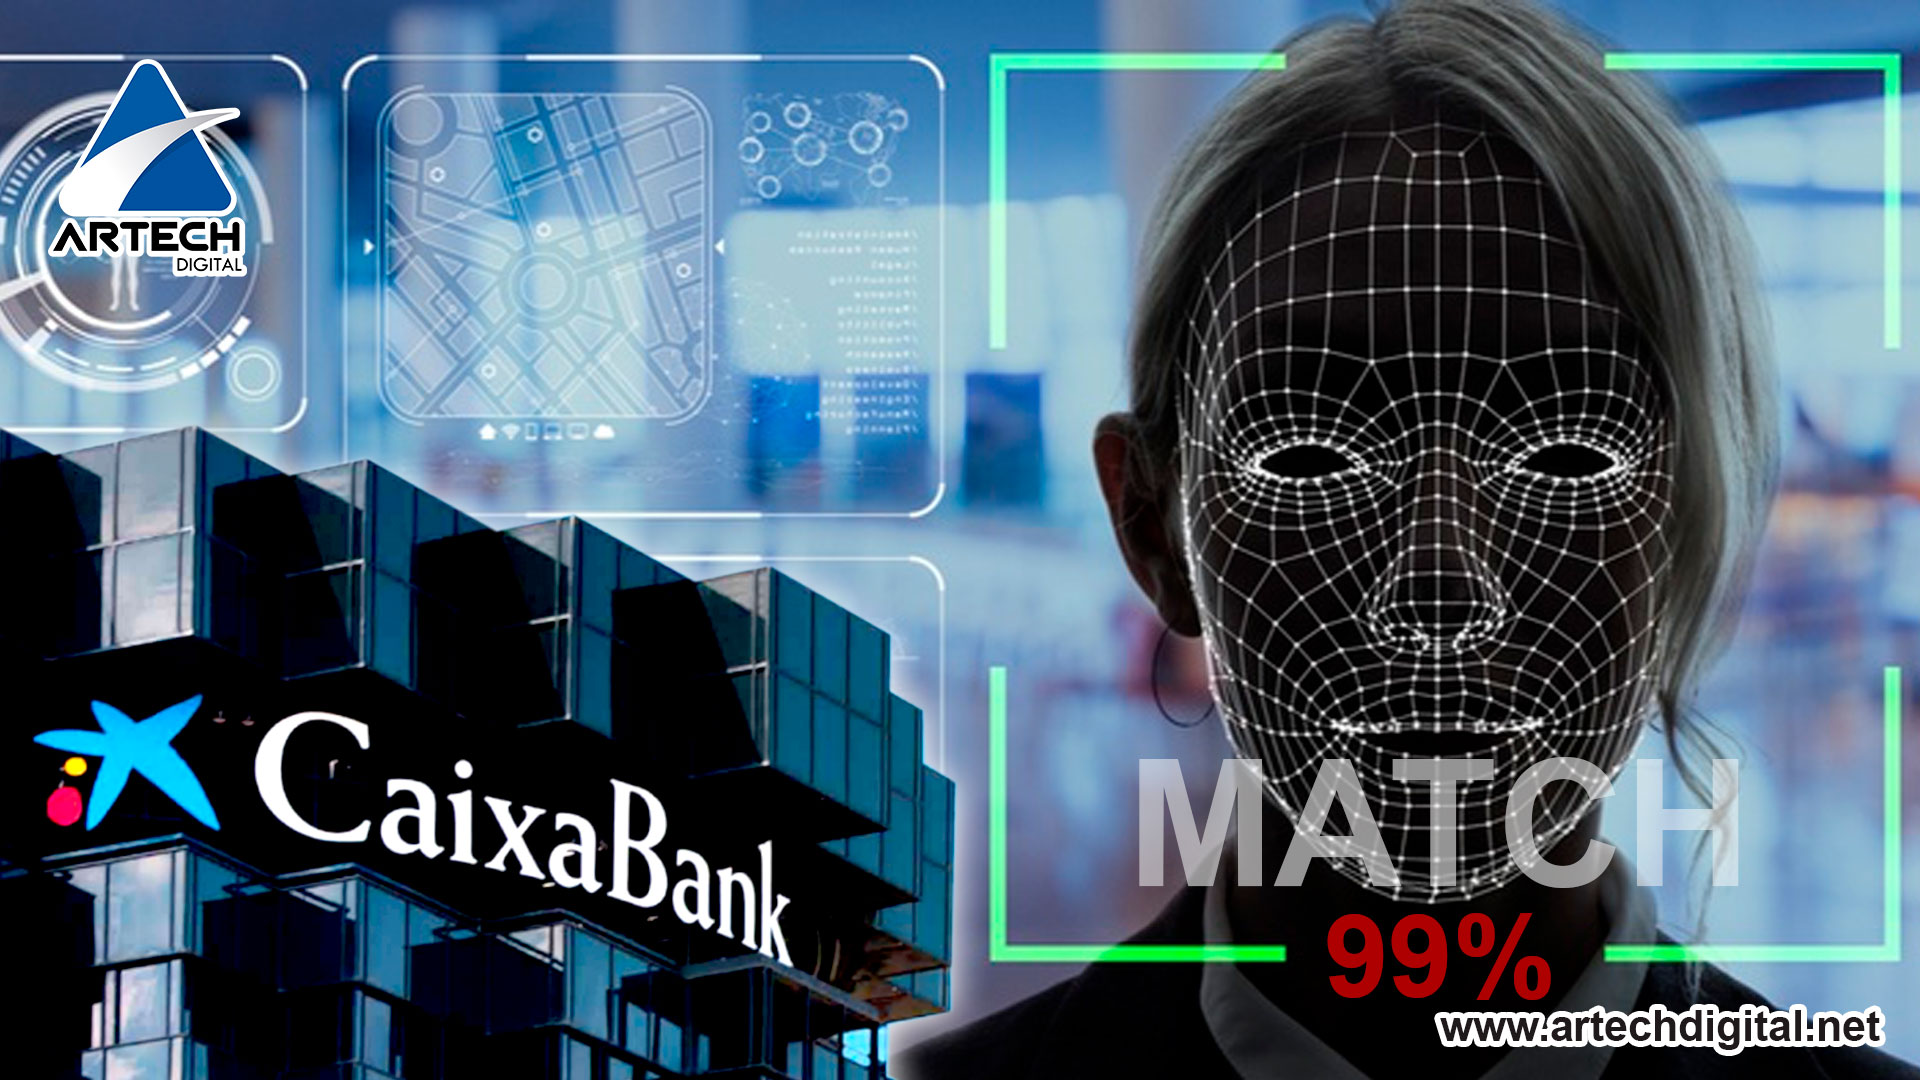 Biometric Technology: Applying face recognition at Caixabank